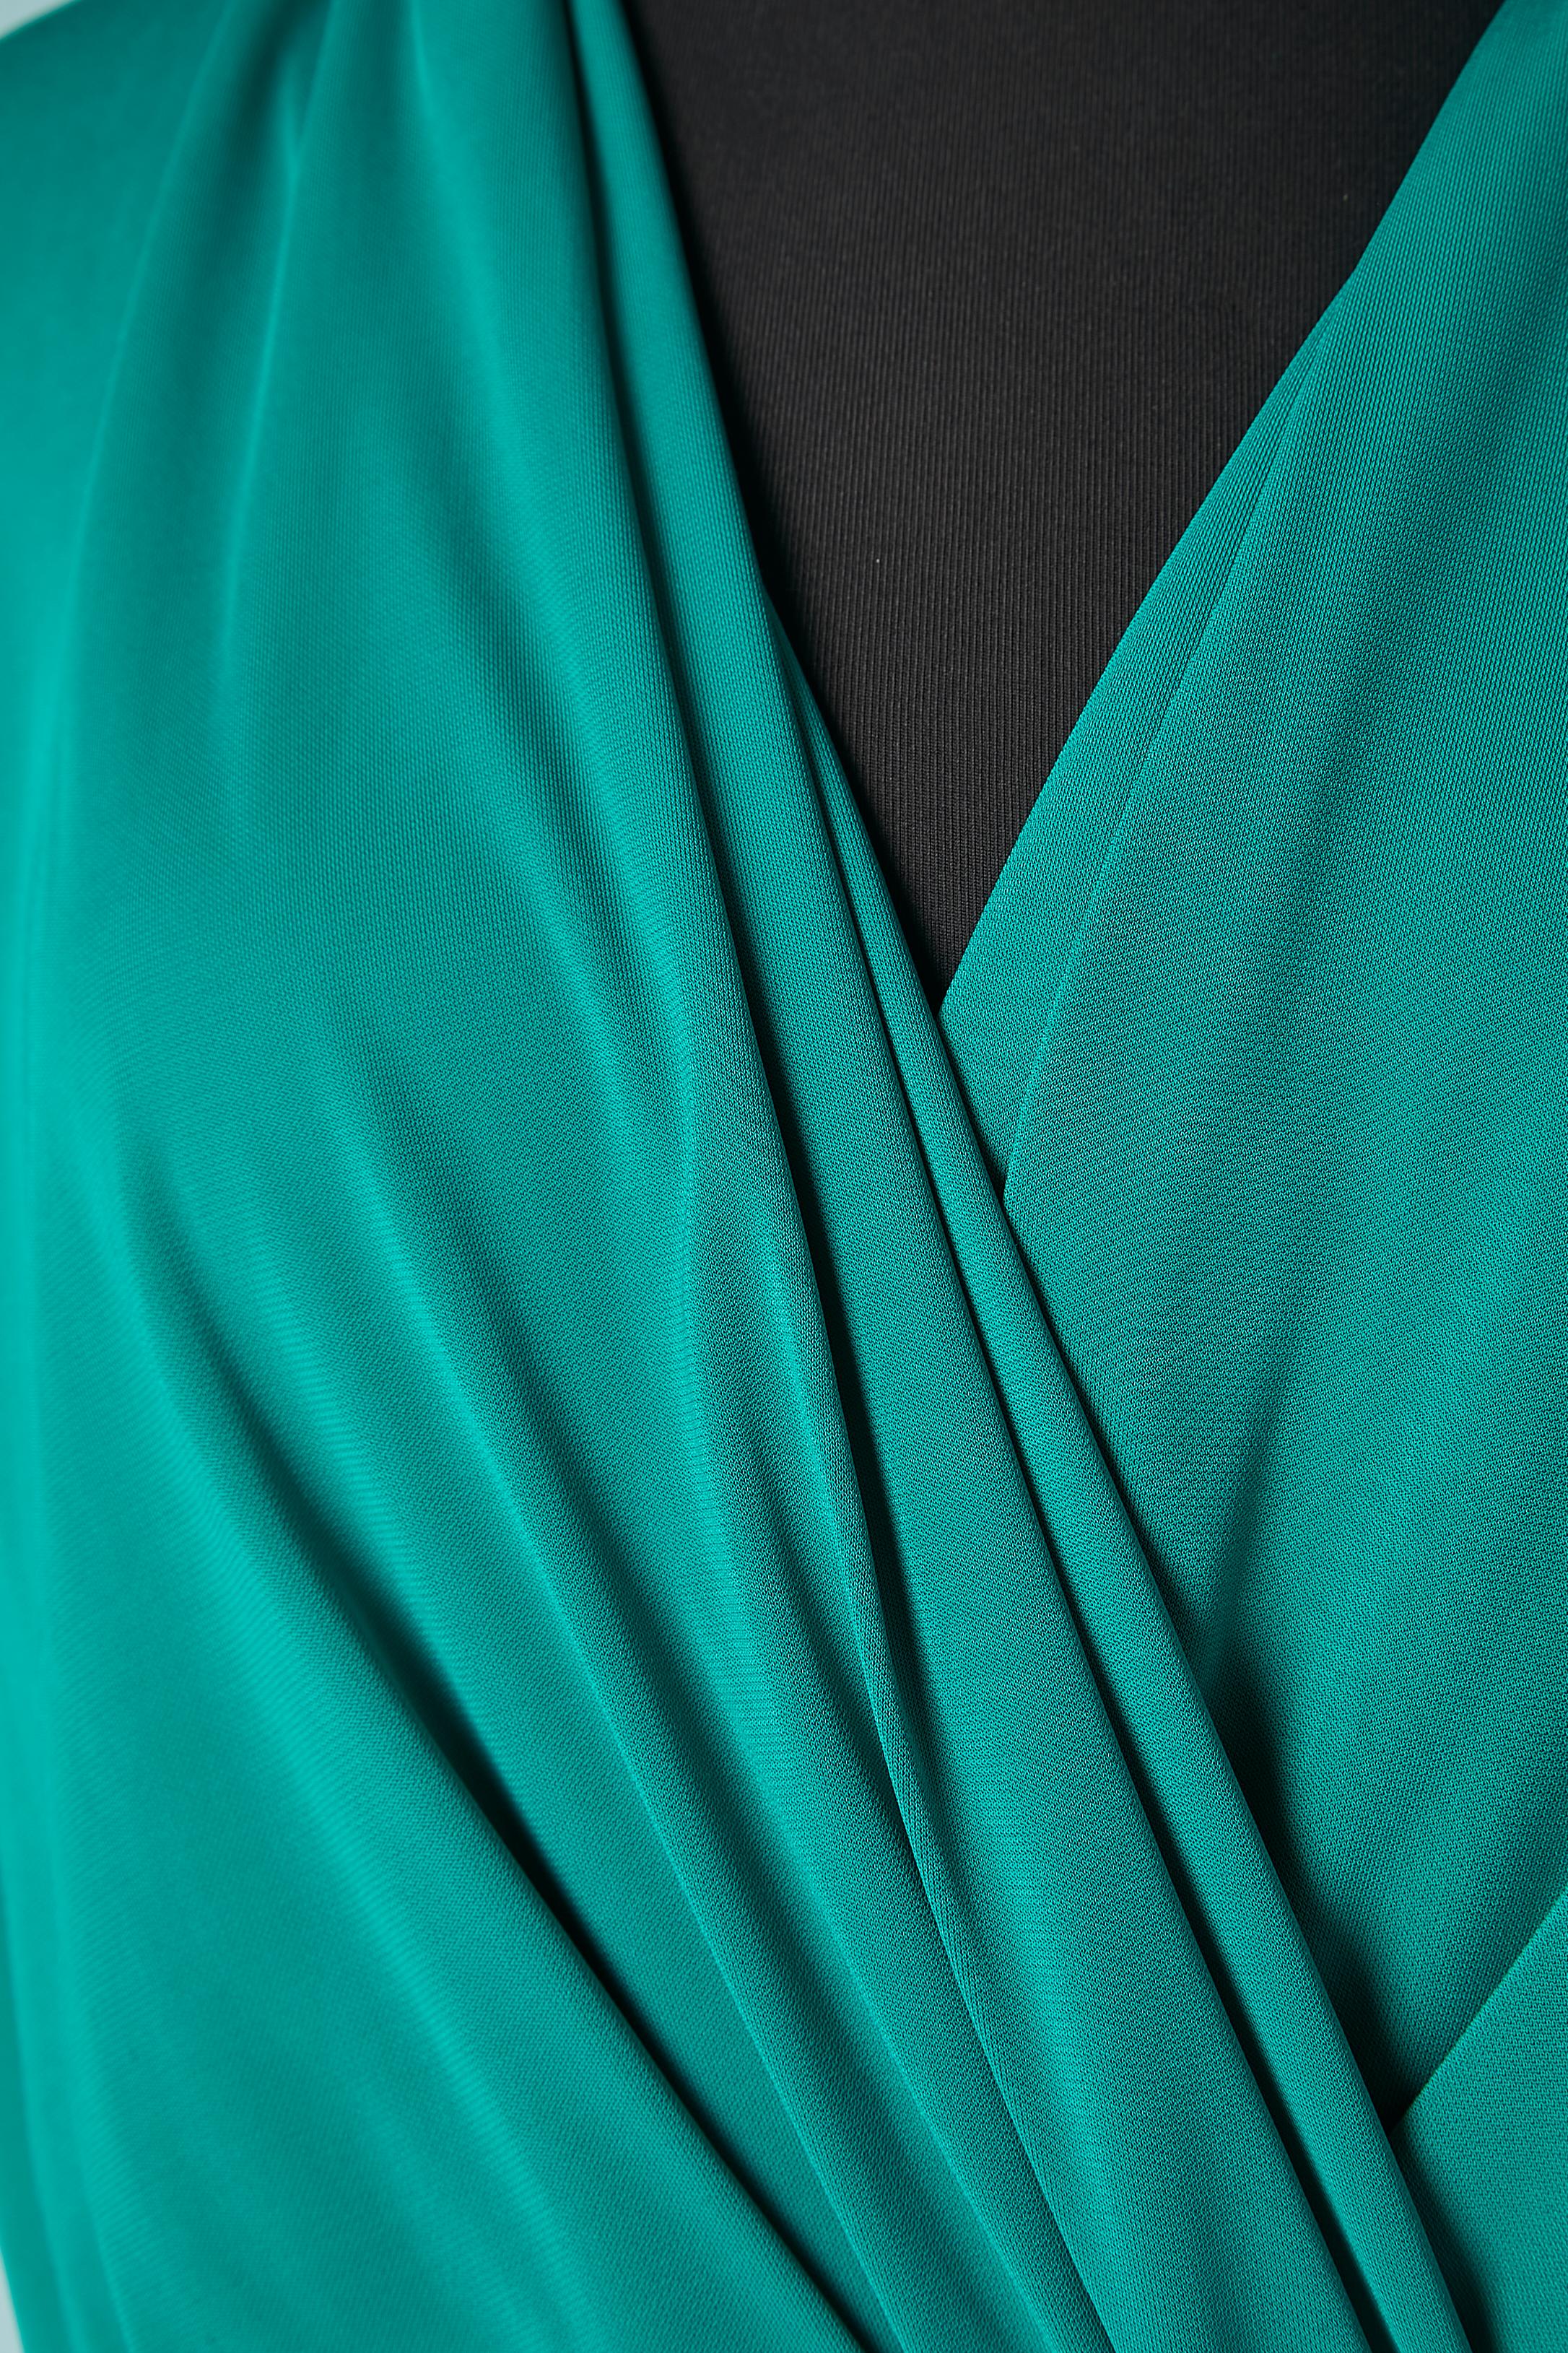 Emerald green rayon draped cocktail dress.  Elastic waist. Pockets on both side. 
SIZE M 